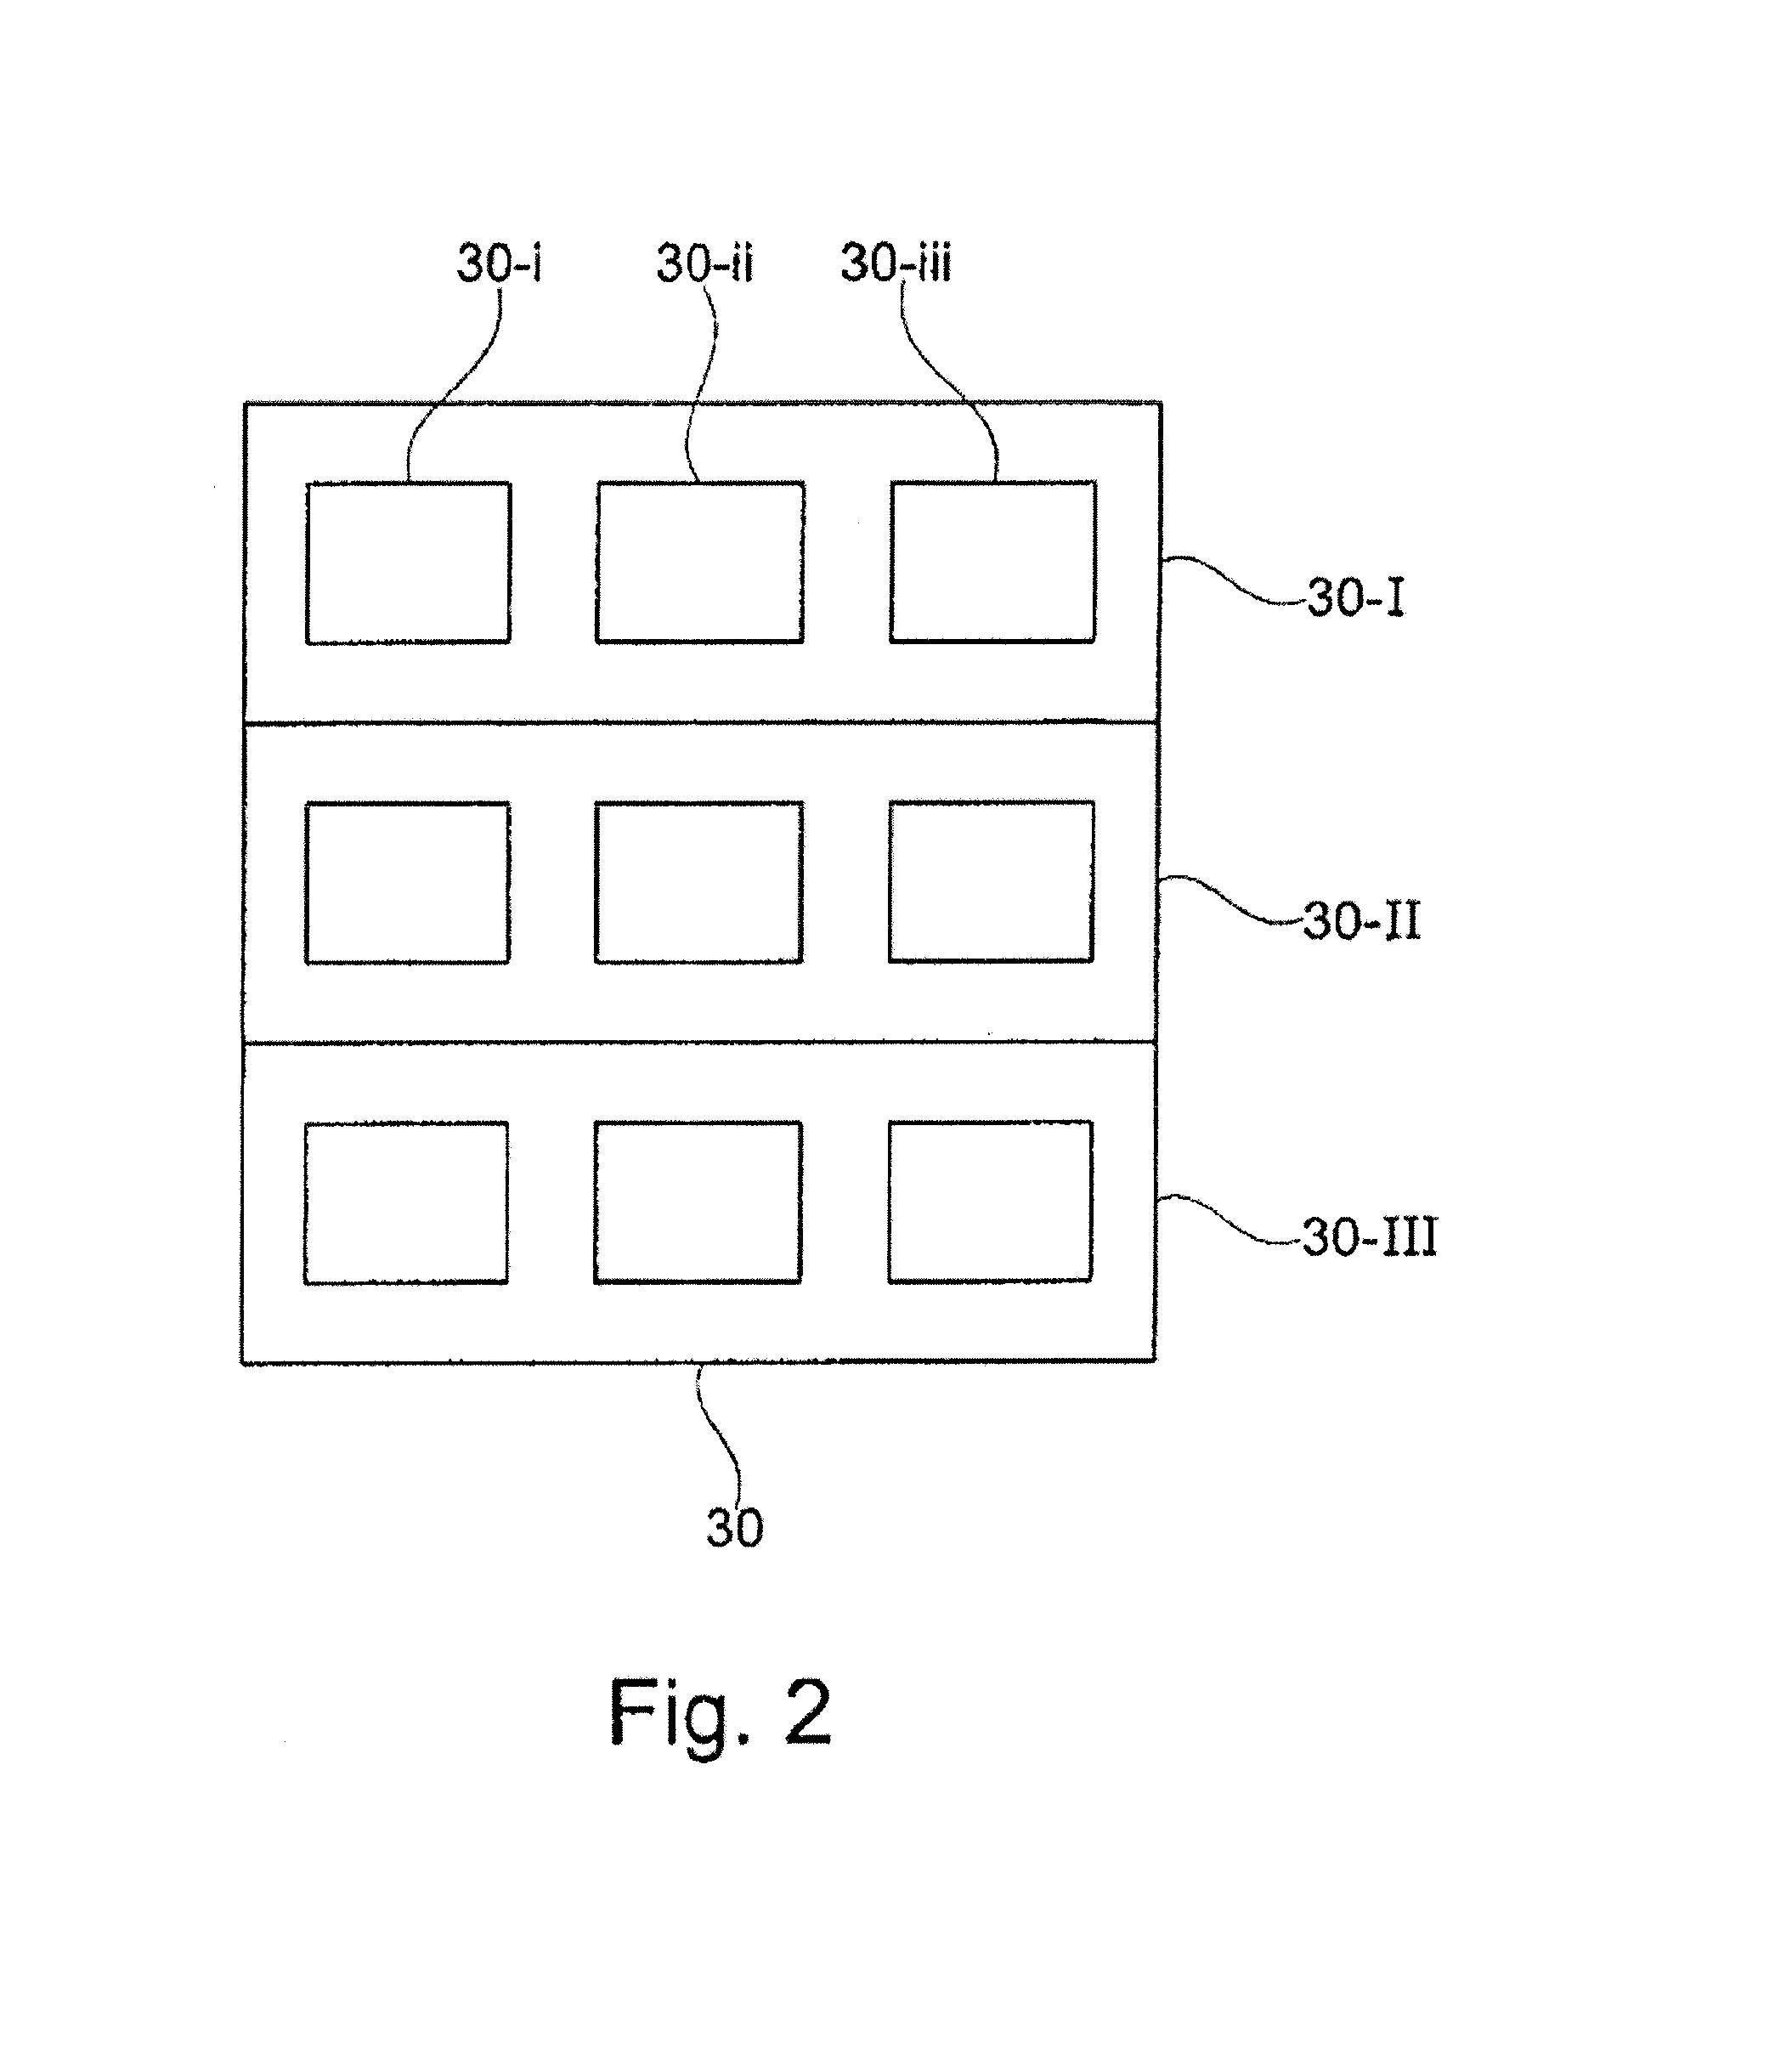 Method of applying a coating onto workpieces and device for coating workpieces